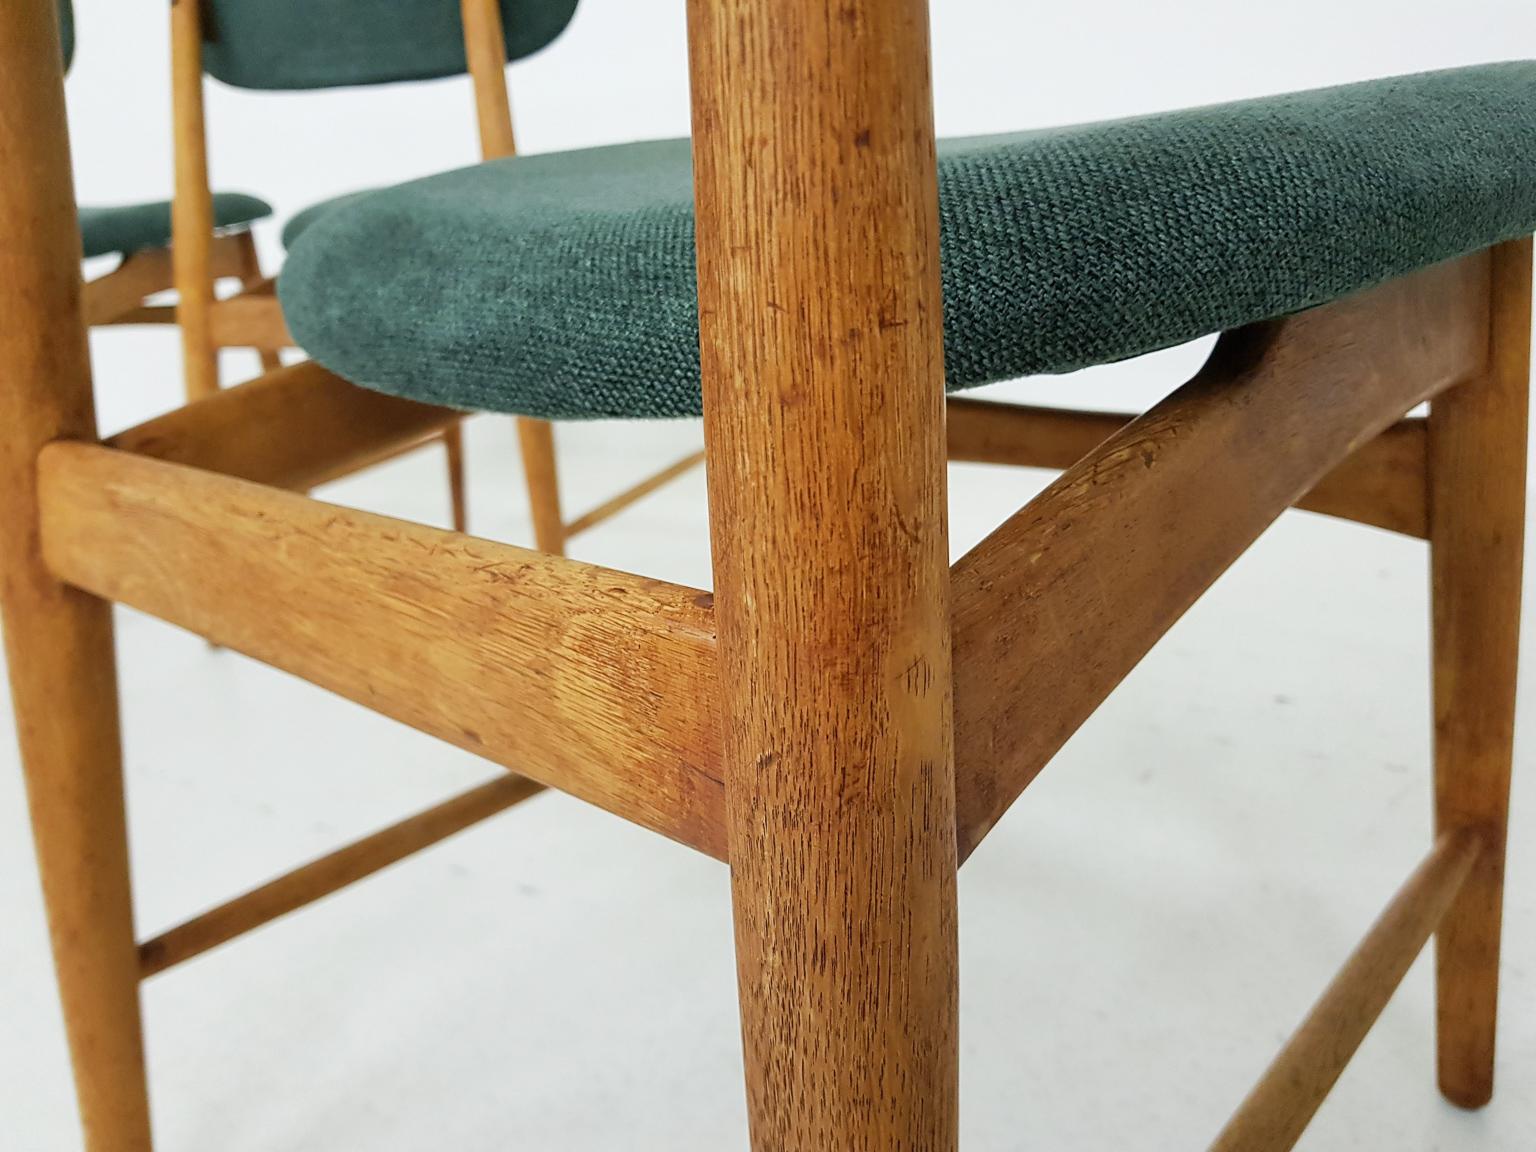 Set of 4 Oak Dining Room Chairs Attributed to Bovenkamp, The Netherlands, 1960s For Sale 5